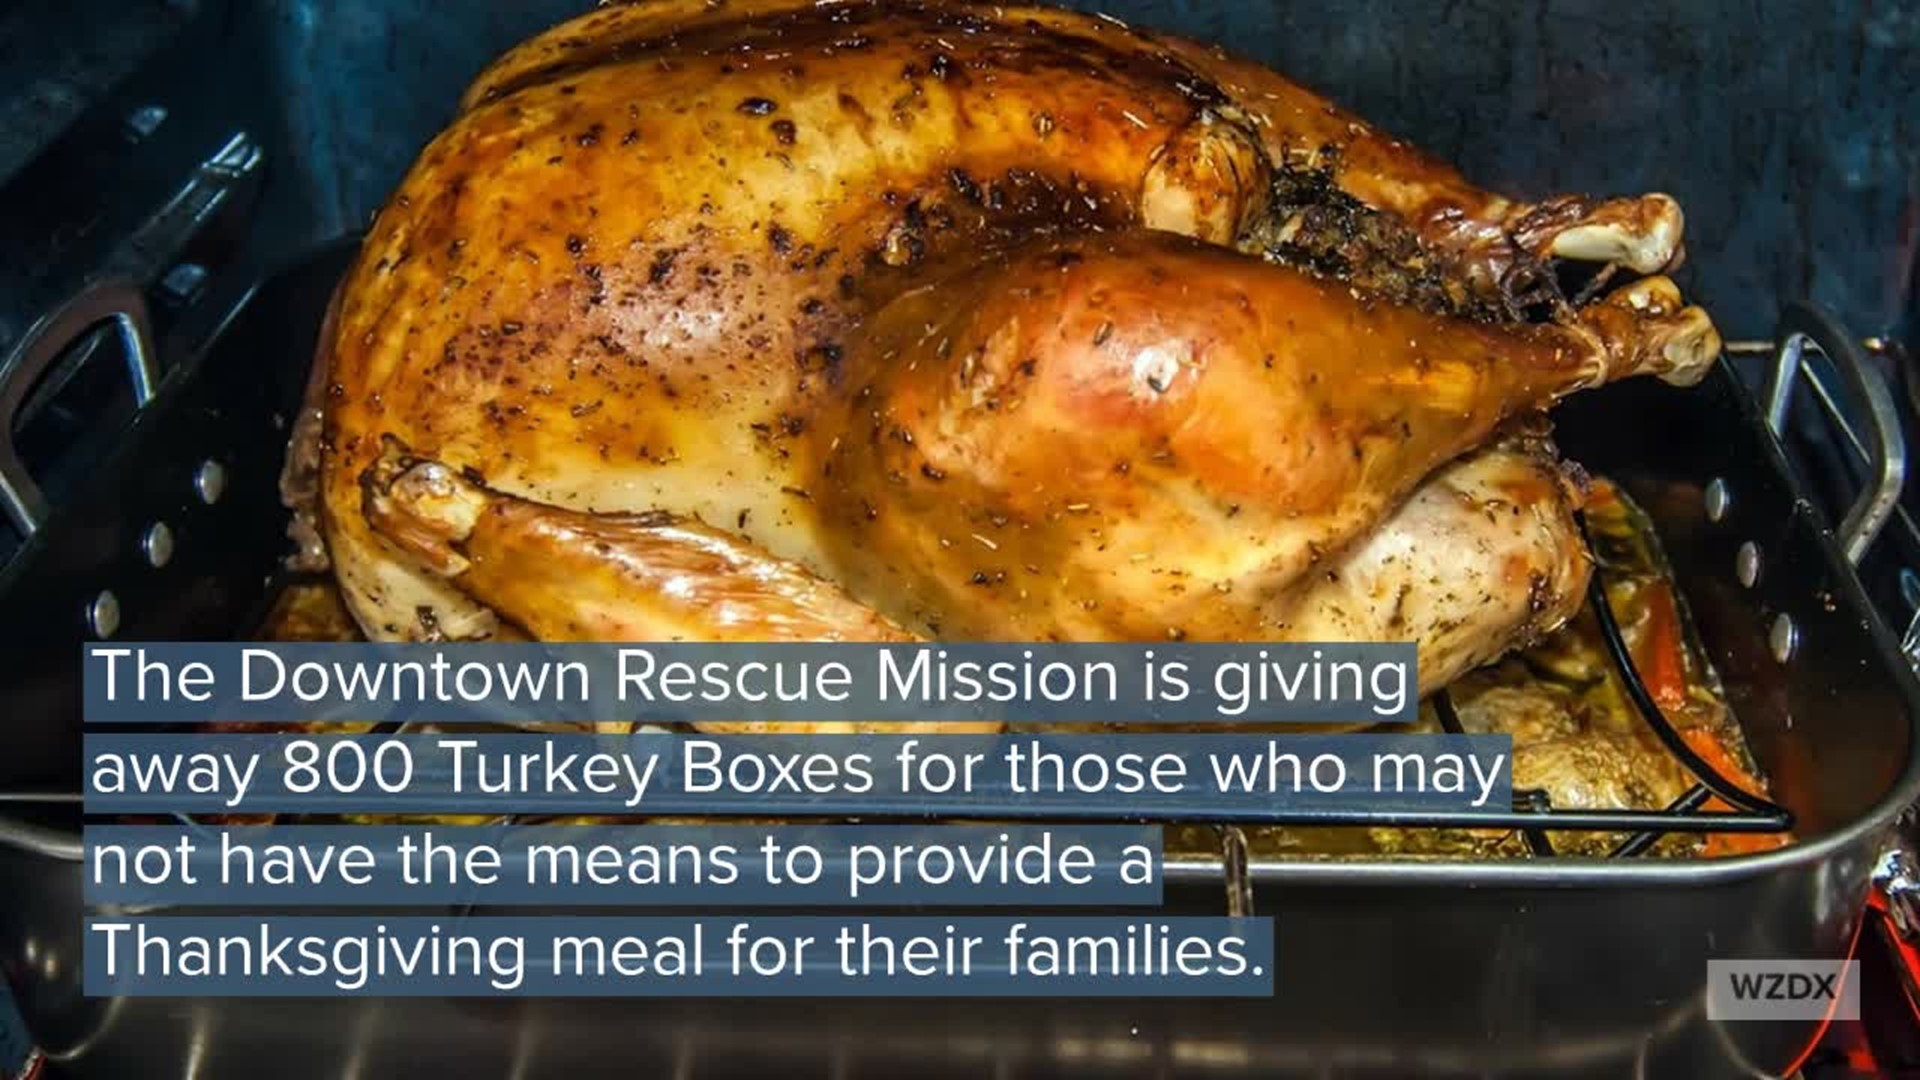 The Downtown Rescue Mission is giving away 800 Turkey Boxes for those who may not have the means to provide a Thanksgiving meal for their families. The boxes contain a turkey and all the fixings to cook a full Thanksgiving meal for a family of 4-6 and will be given out the week of Thanksgiving.